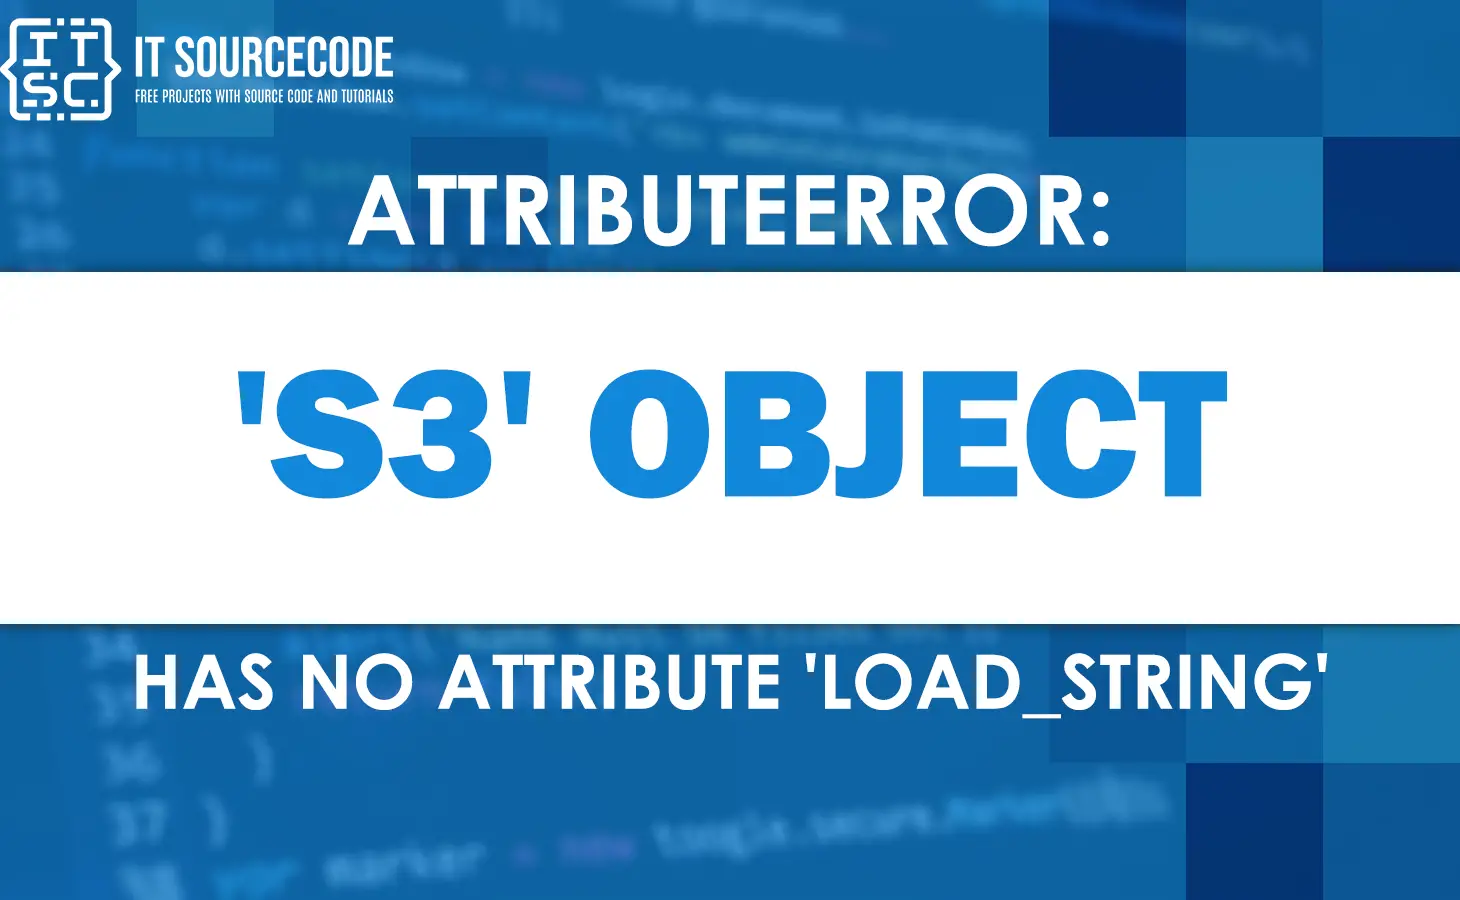 Attributeerror: s3 object has no attribute load_string